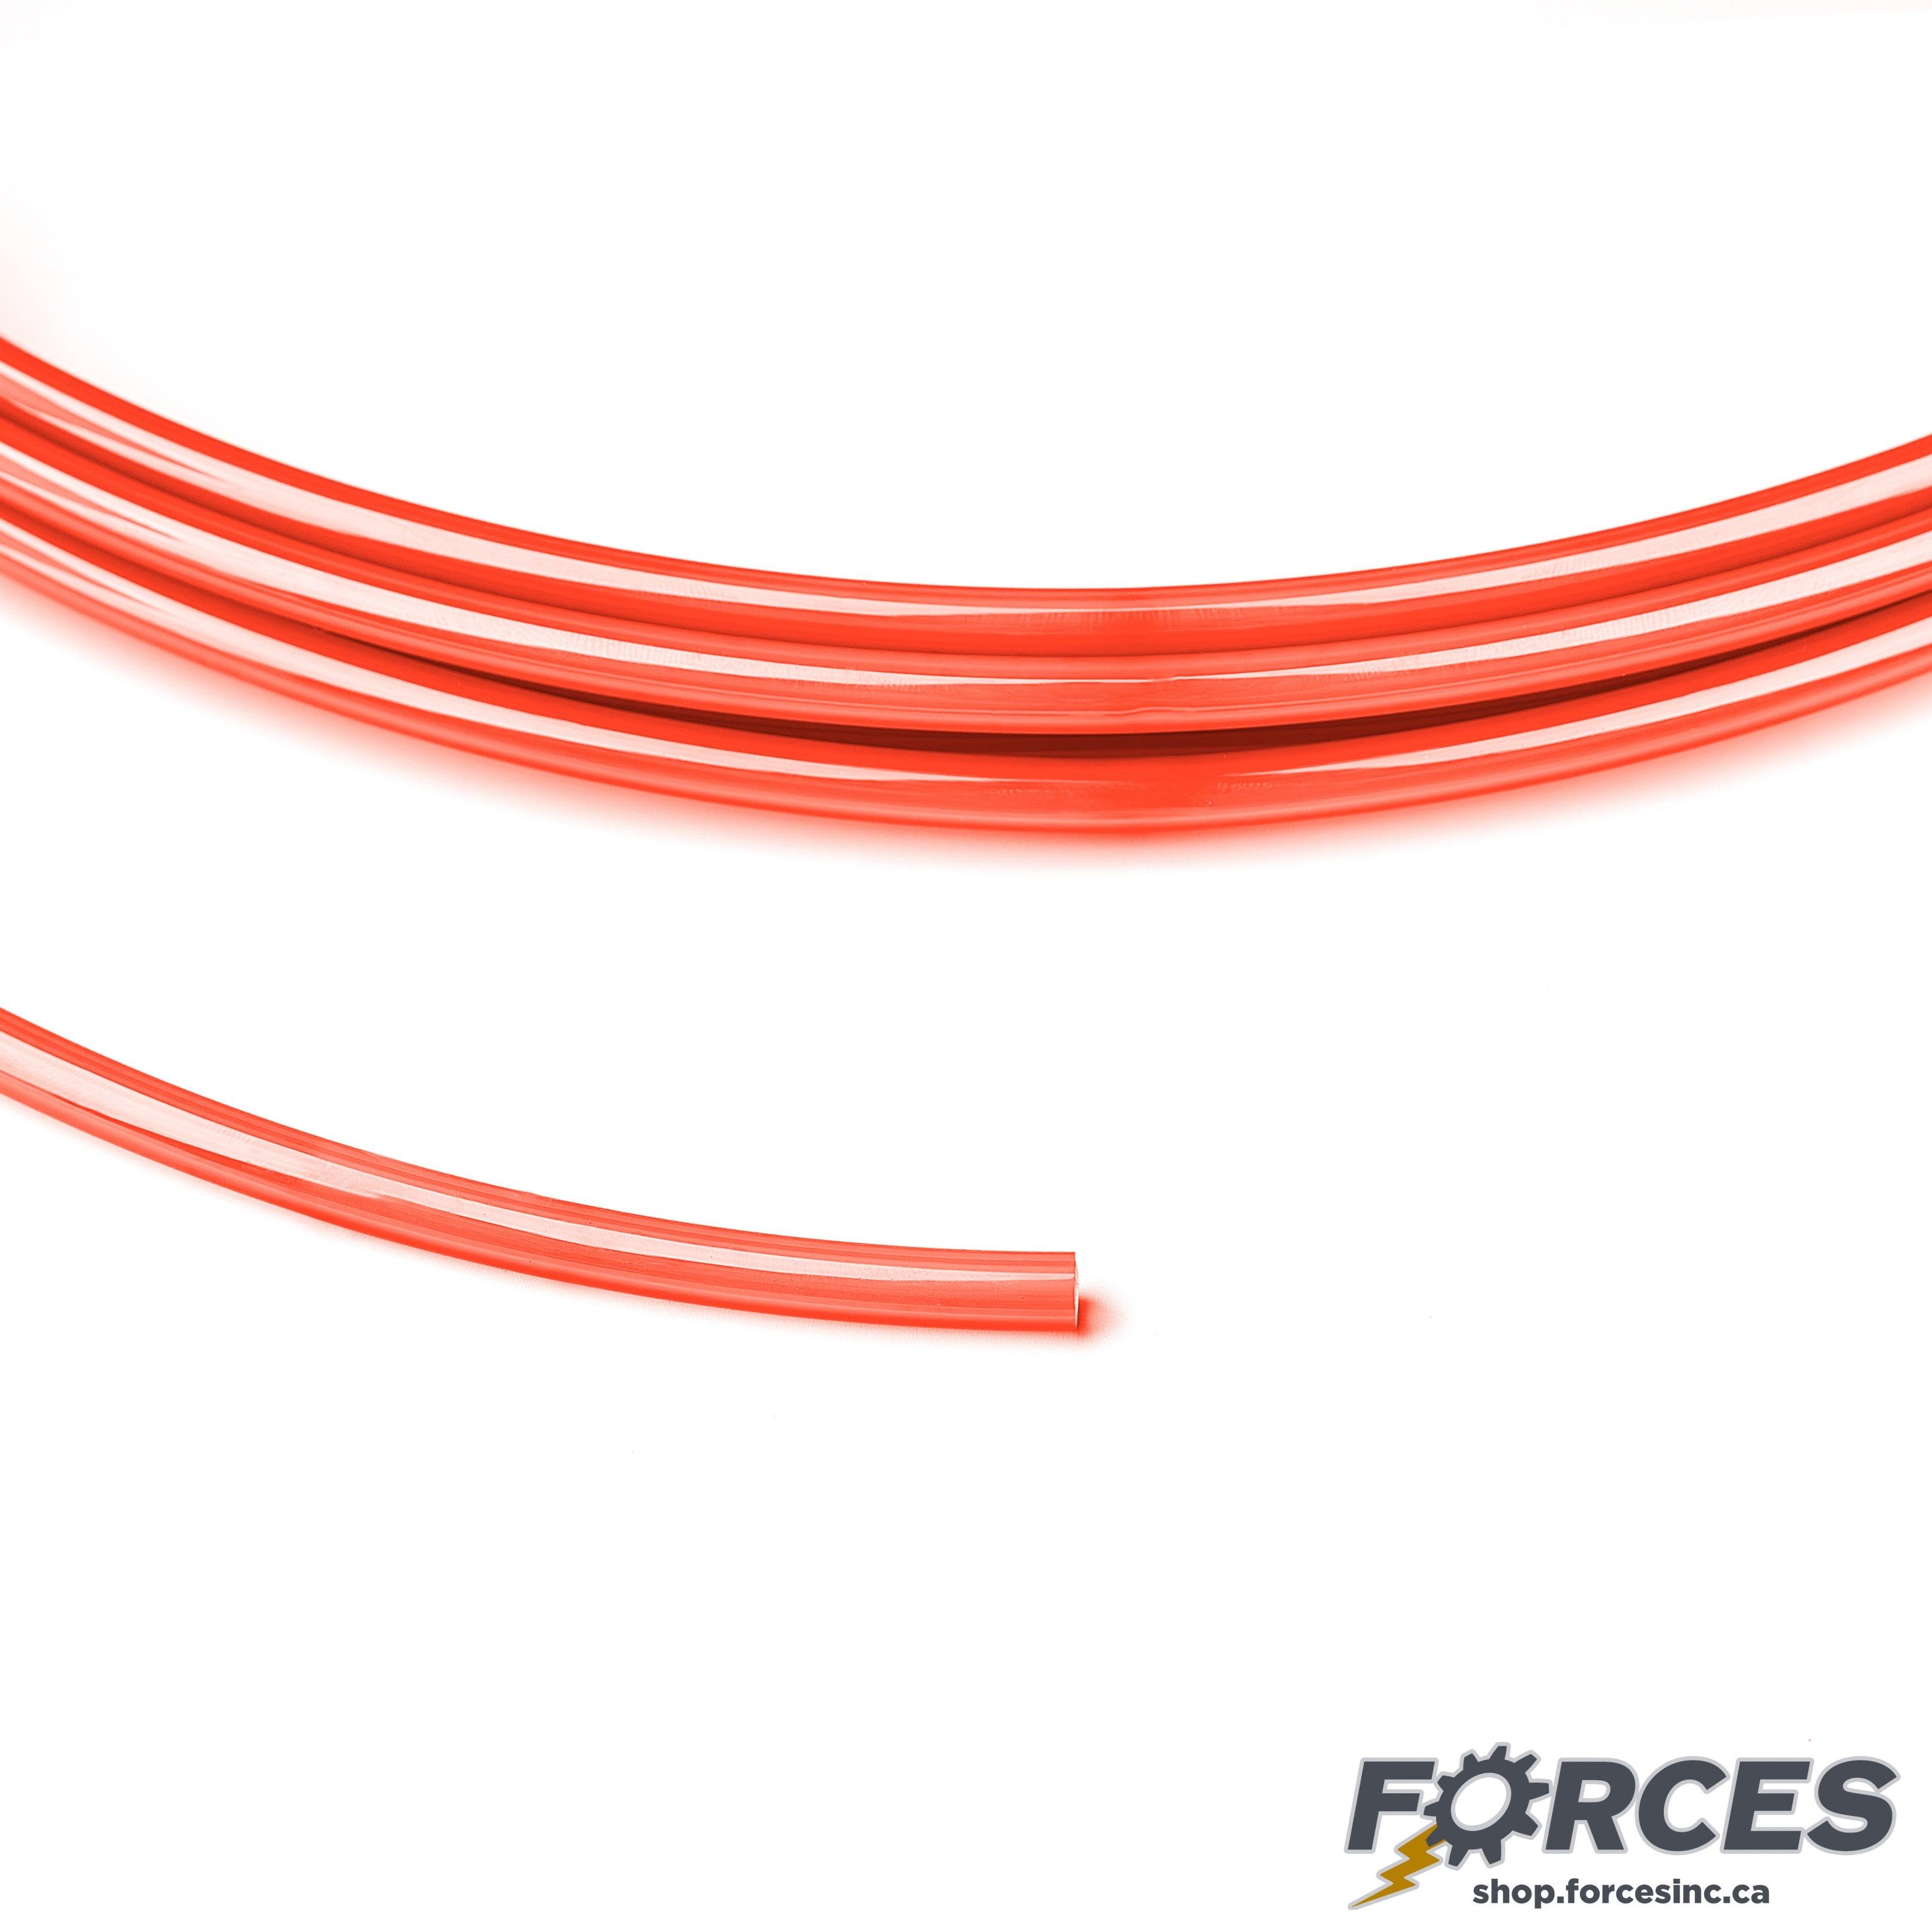 Pneumatic Air Tubing 6mm x 4mm Red Polyurethane - 330ft - Forces Inc